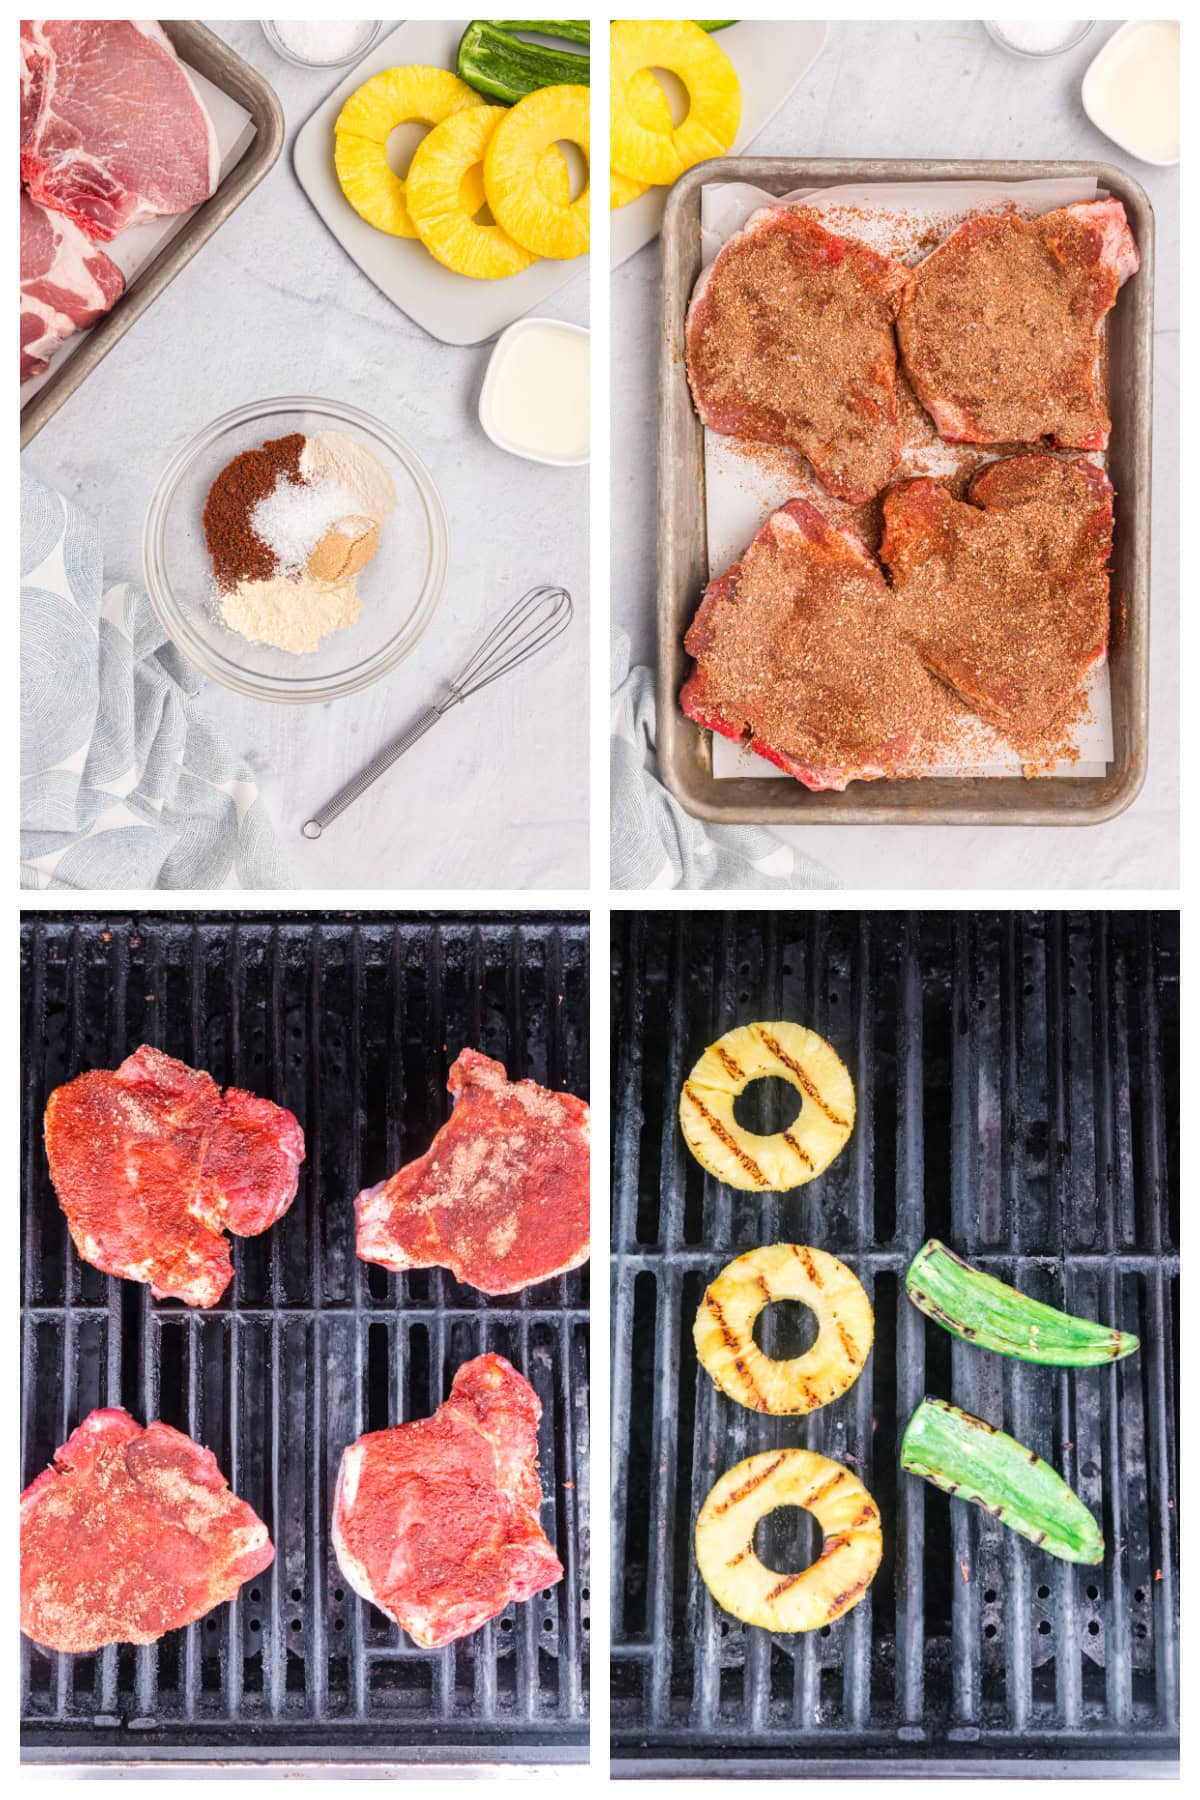 four photos showing how to make chili rubbed pork chops with grilled pineapple salsa